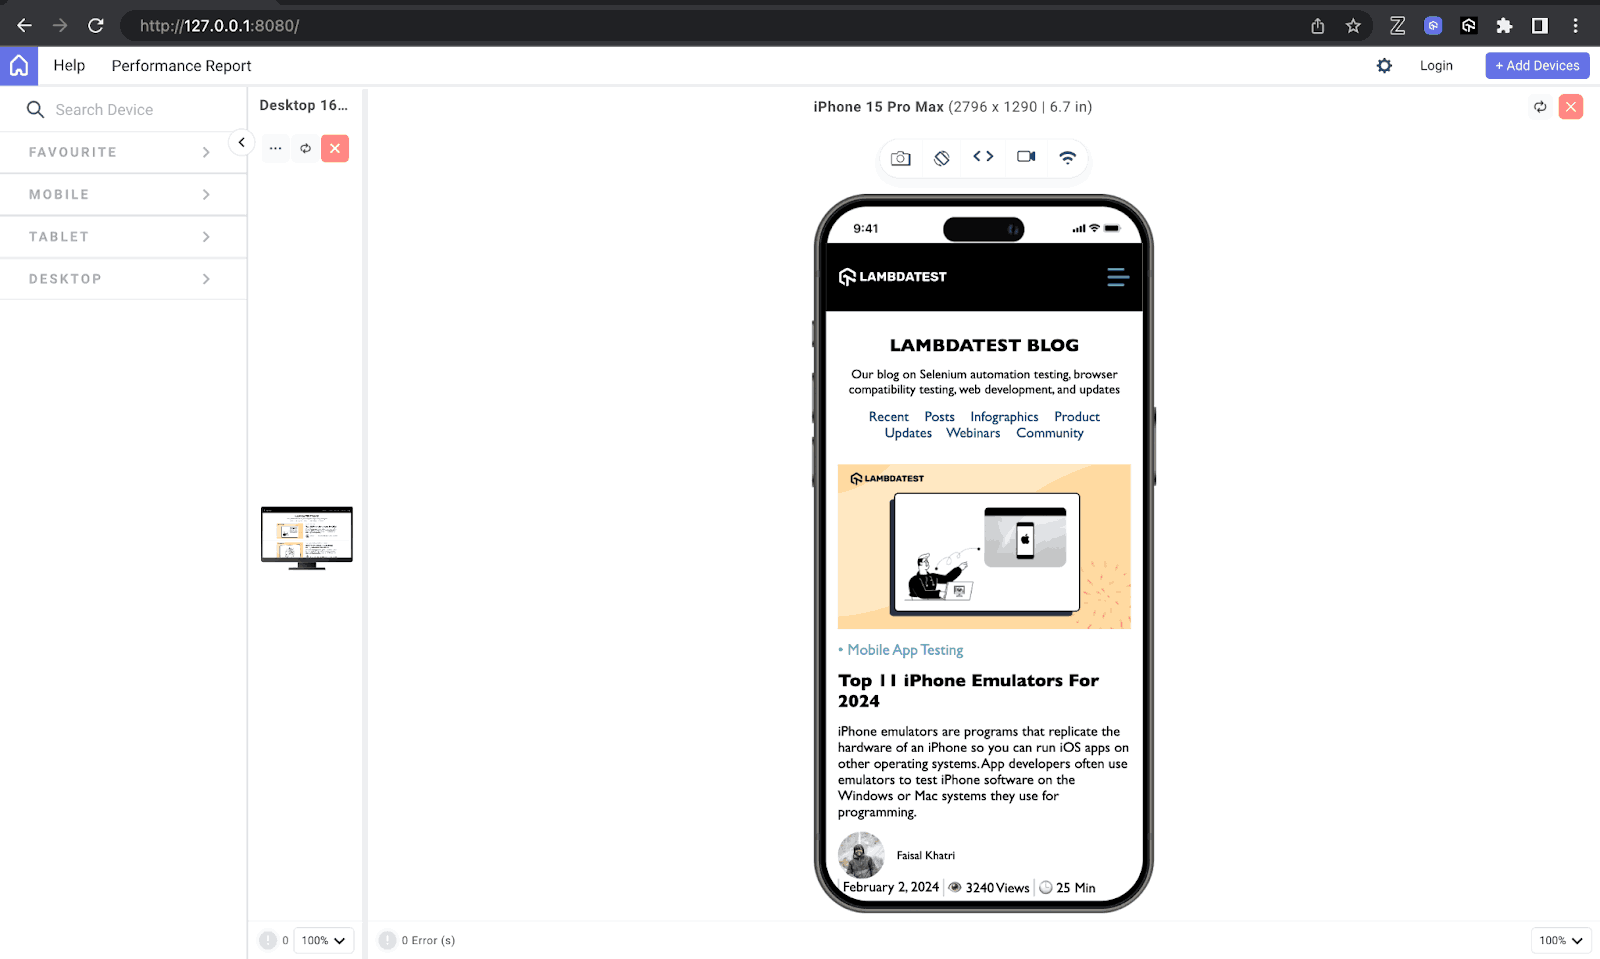  image to be completely visible in mobile